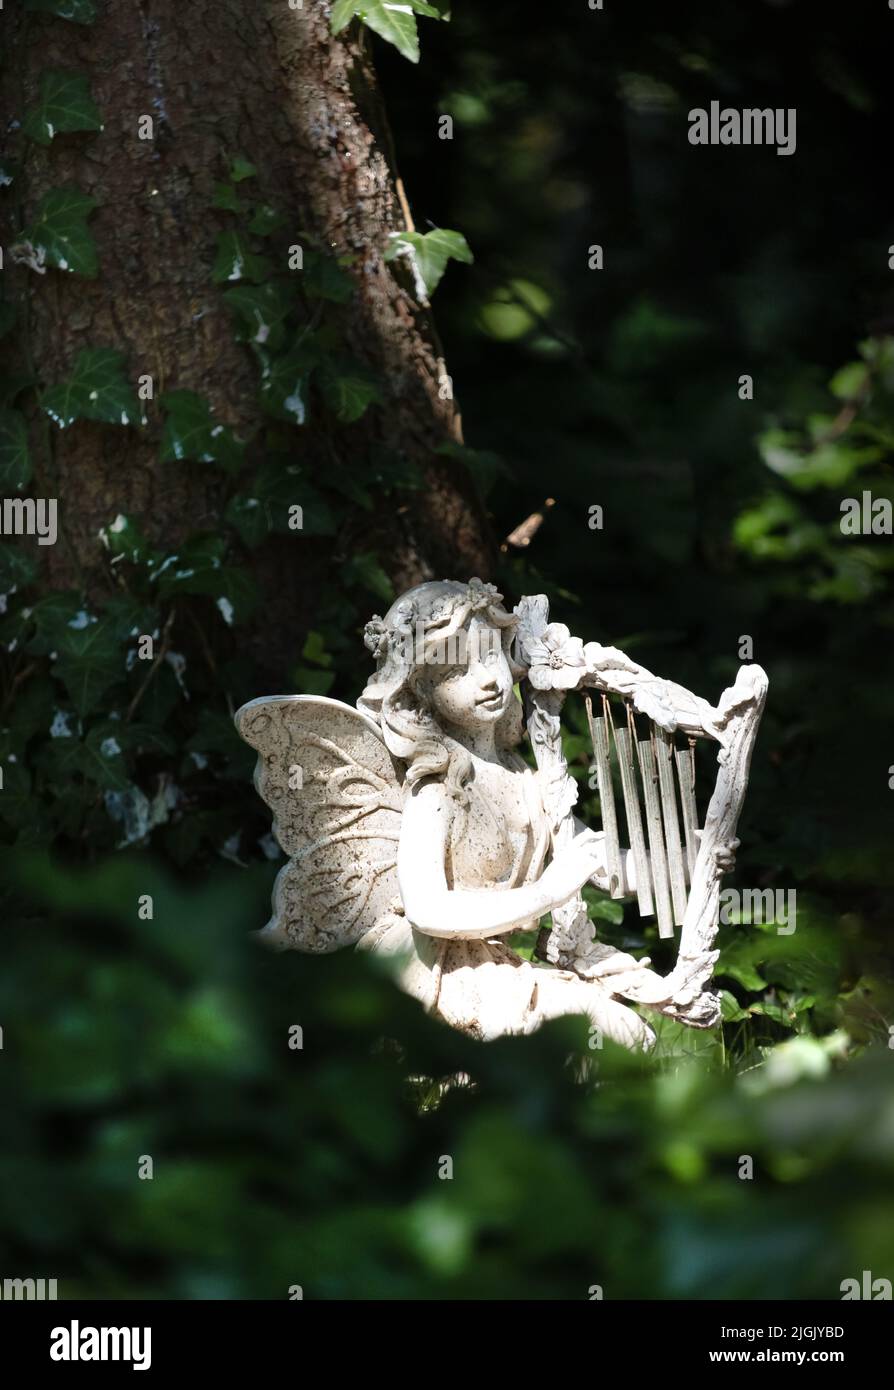 A garden statue of a fairy with a harp sitting in the woods among vines and next to a tree in spring or summer, Lancaster, Pennsylvania Stock Photo